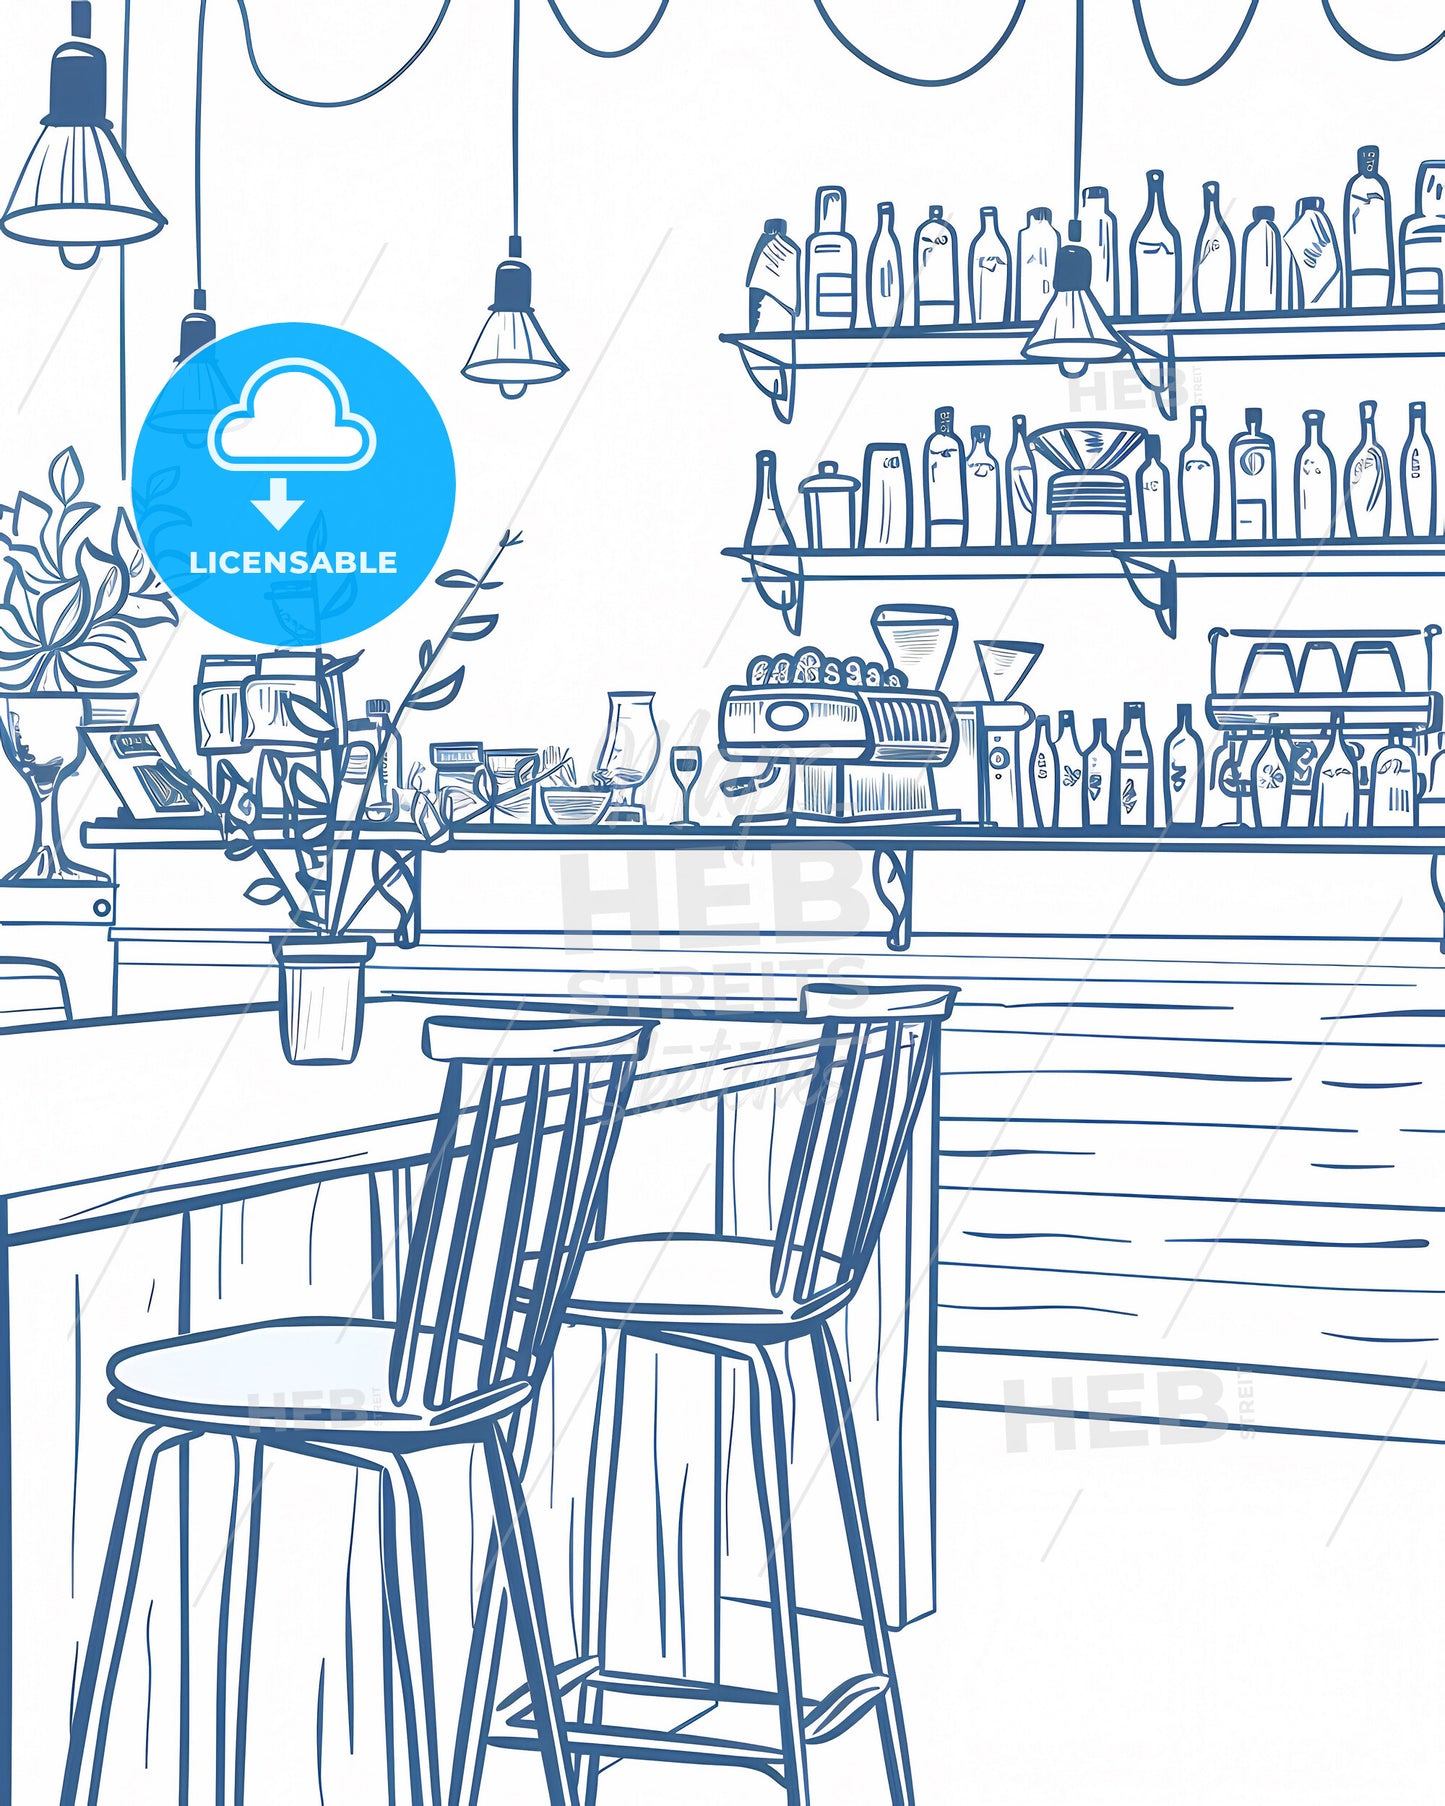 Panoramic Pencil Sketch Cafe Illustration with Linear Bottles and Shelves, Blue Lines on White, Editorial, Flawless Lines, Screen Print